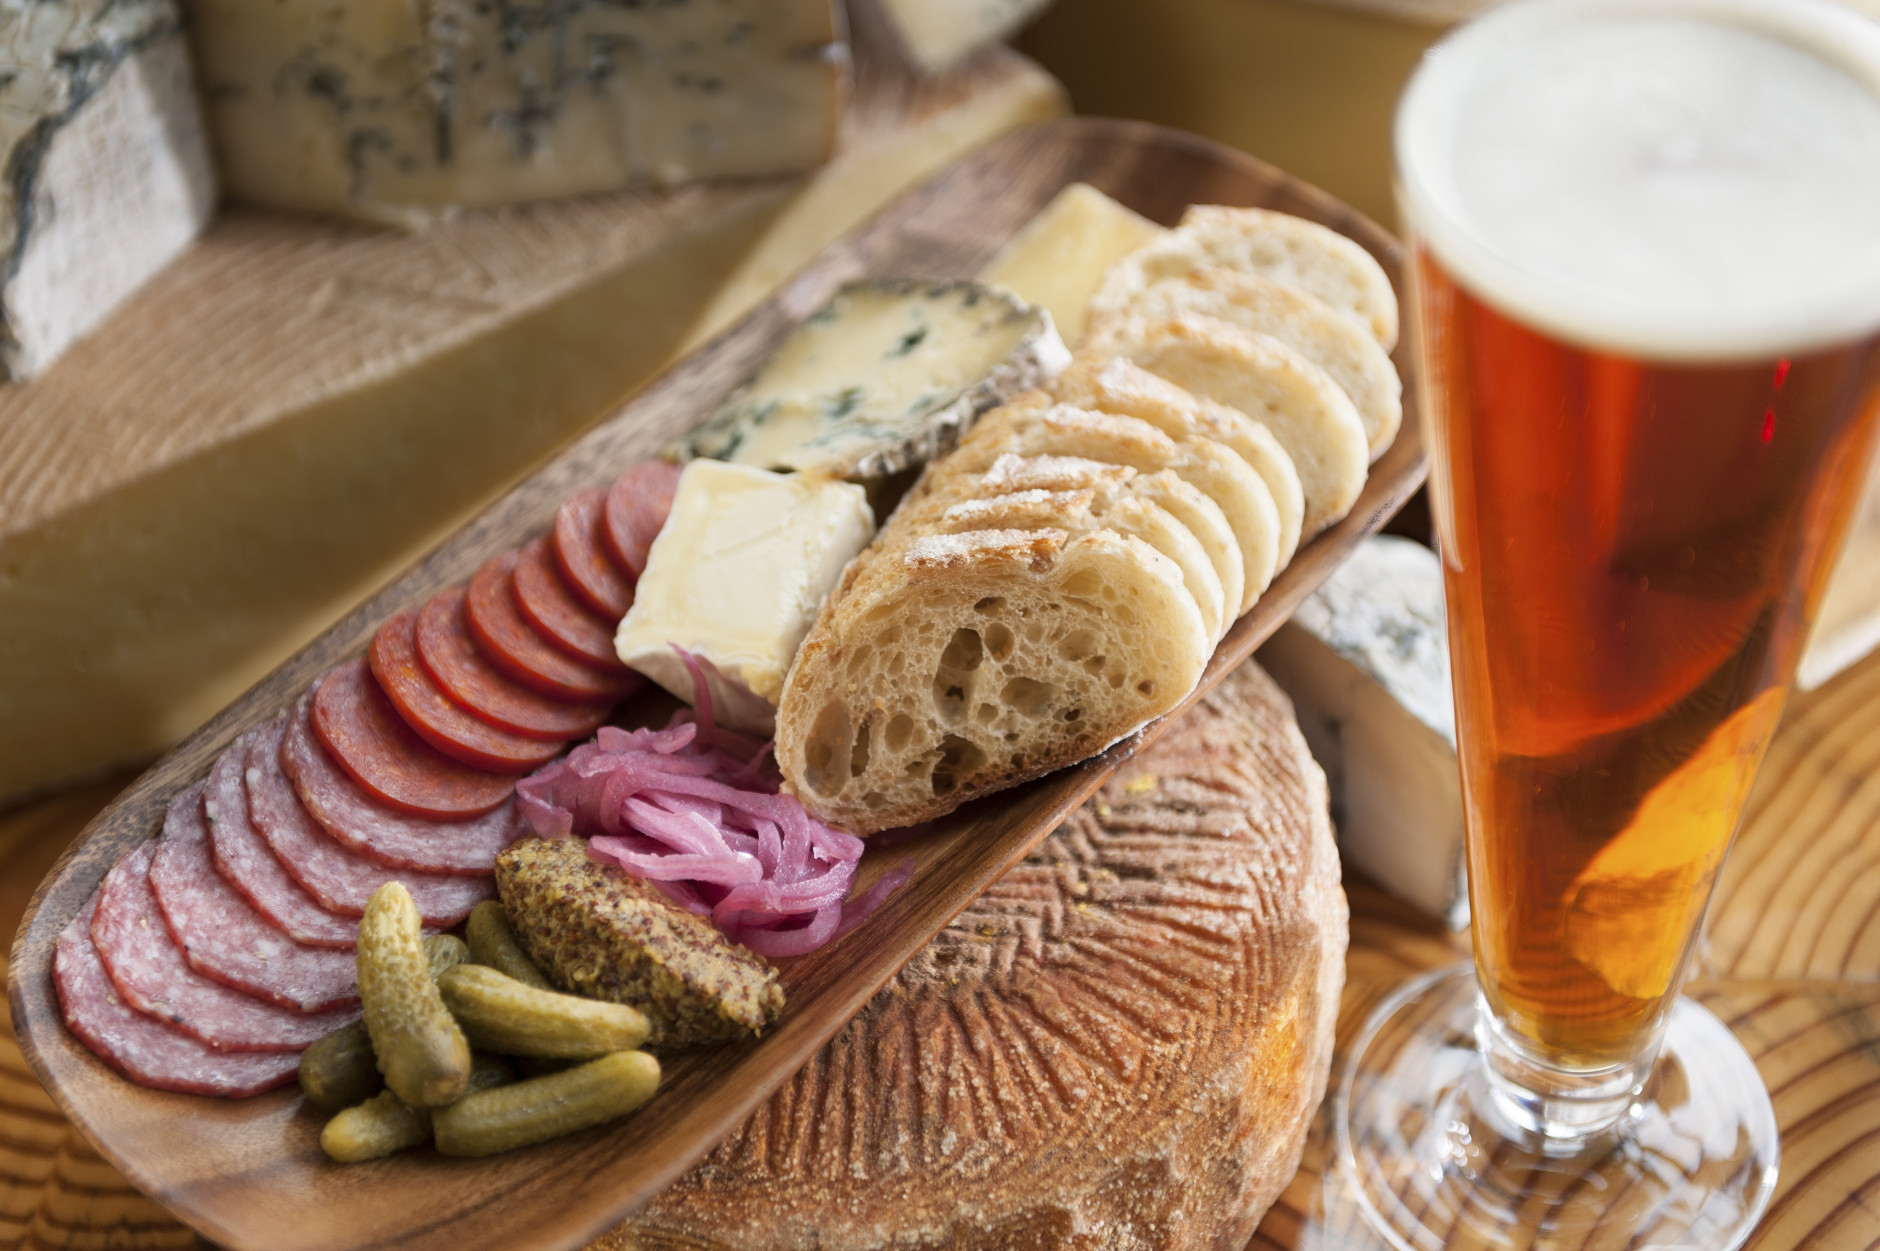 Bread, cheese and a tall glass of beer.